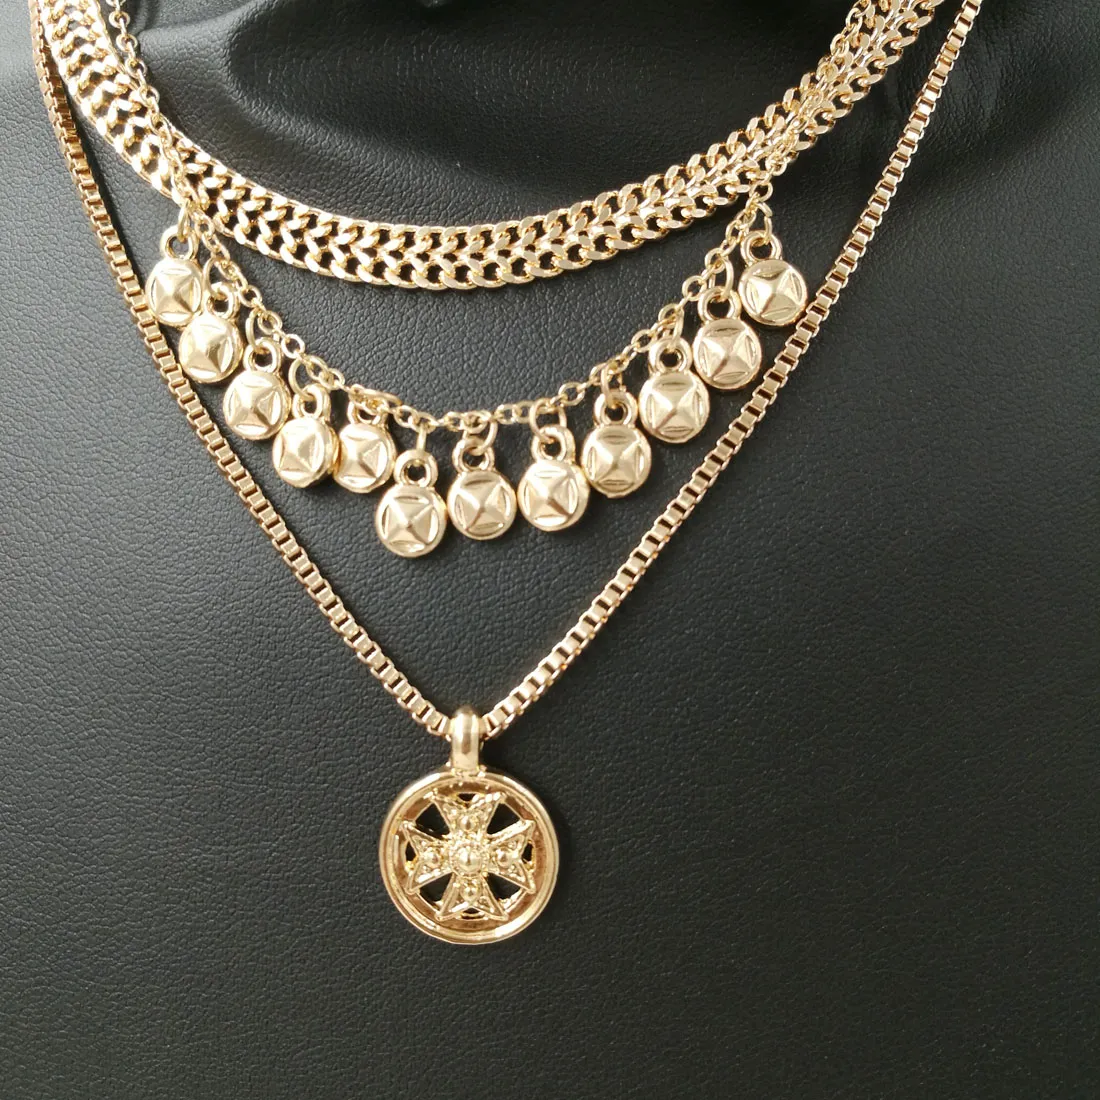 Fashion Brand Punk Metal chain coin chokers necklaces for Women Vintage jewelry Gold Pendants Necklaces chunky necklace3492578